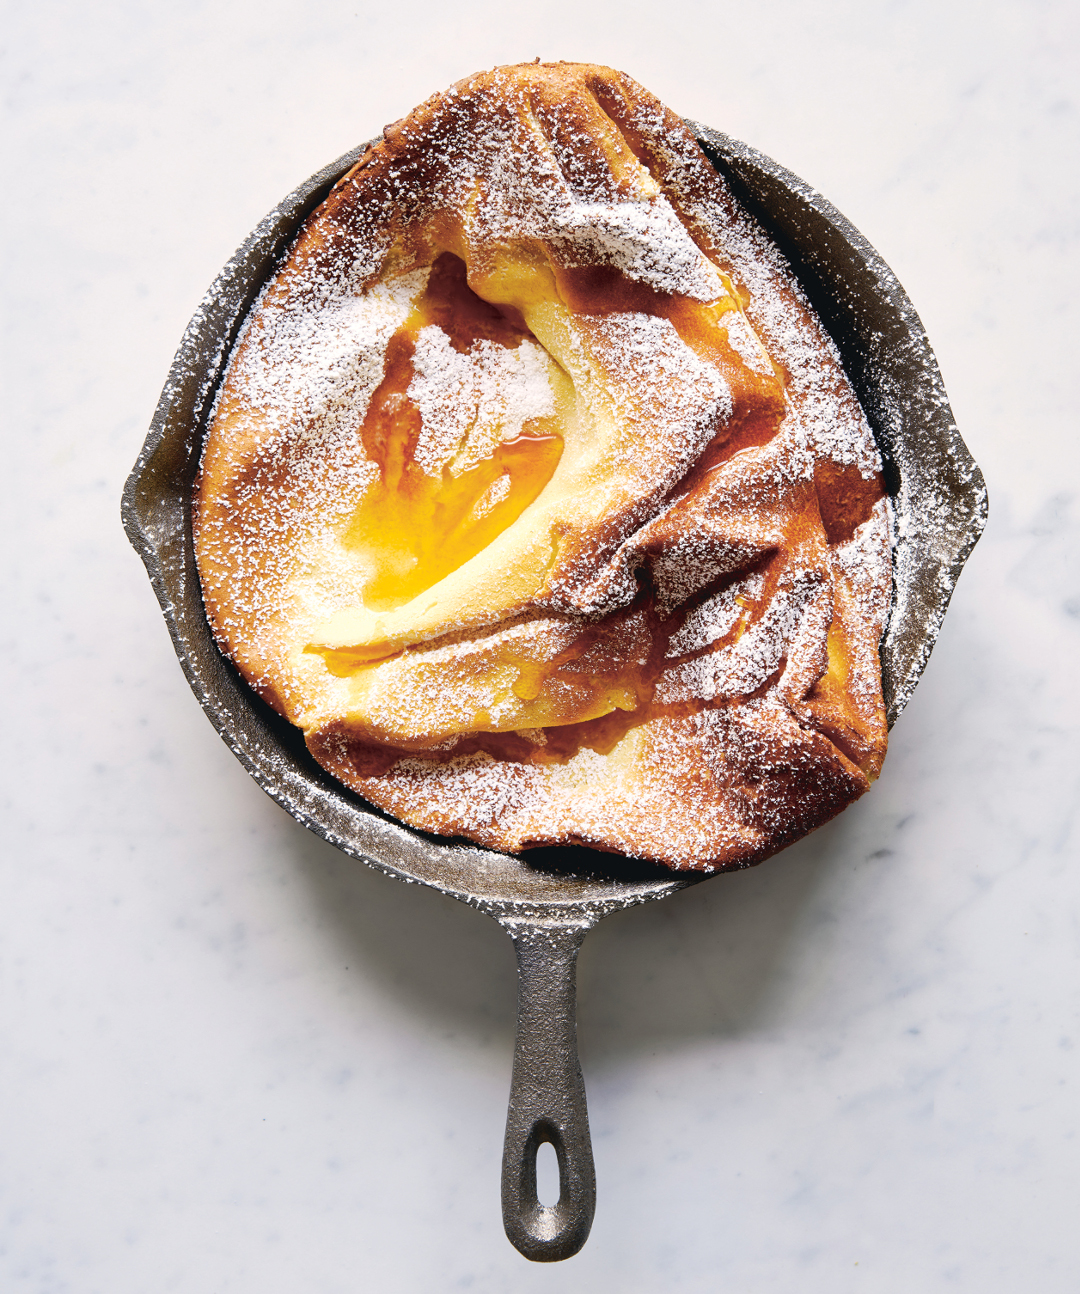 Dutch Baby, from Breakfast: The Cookbook